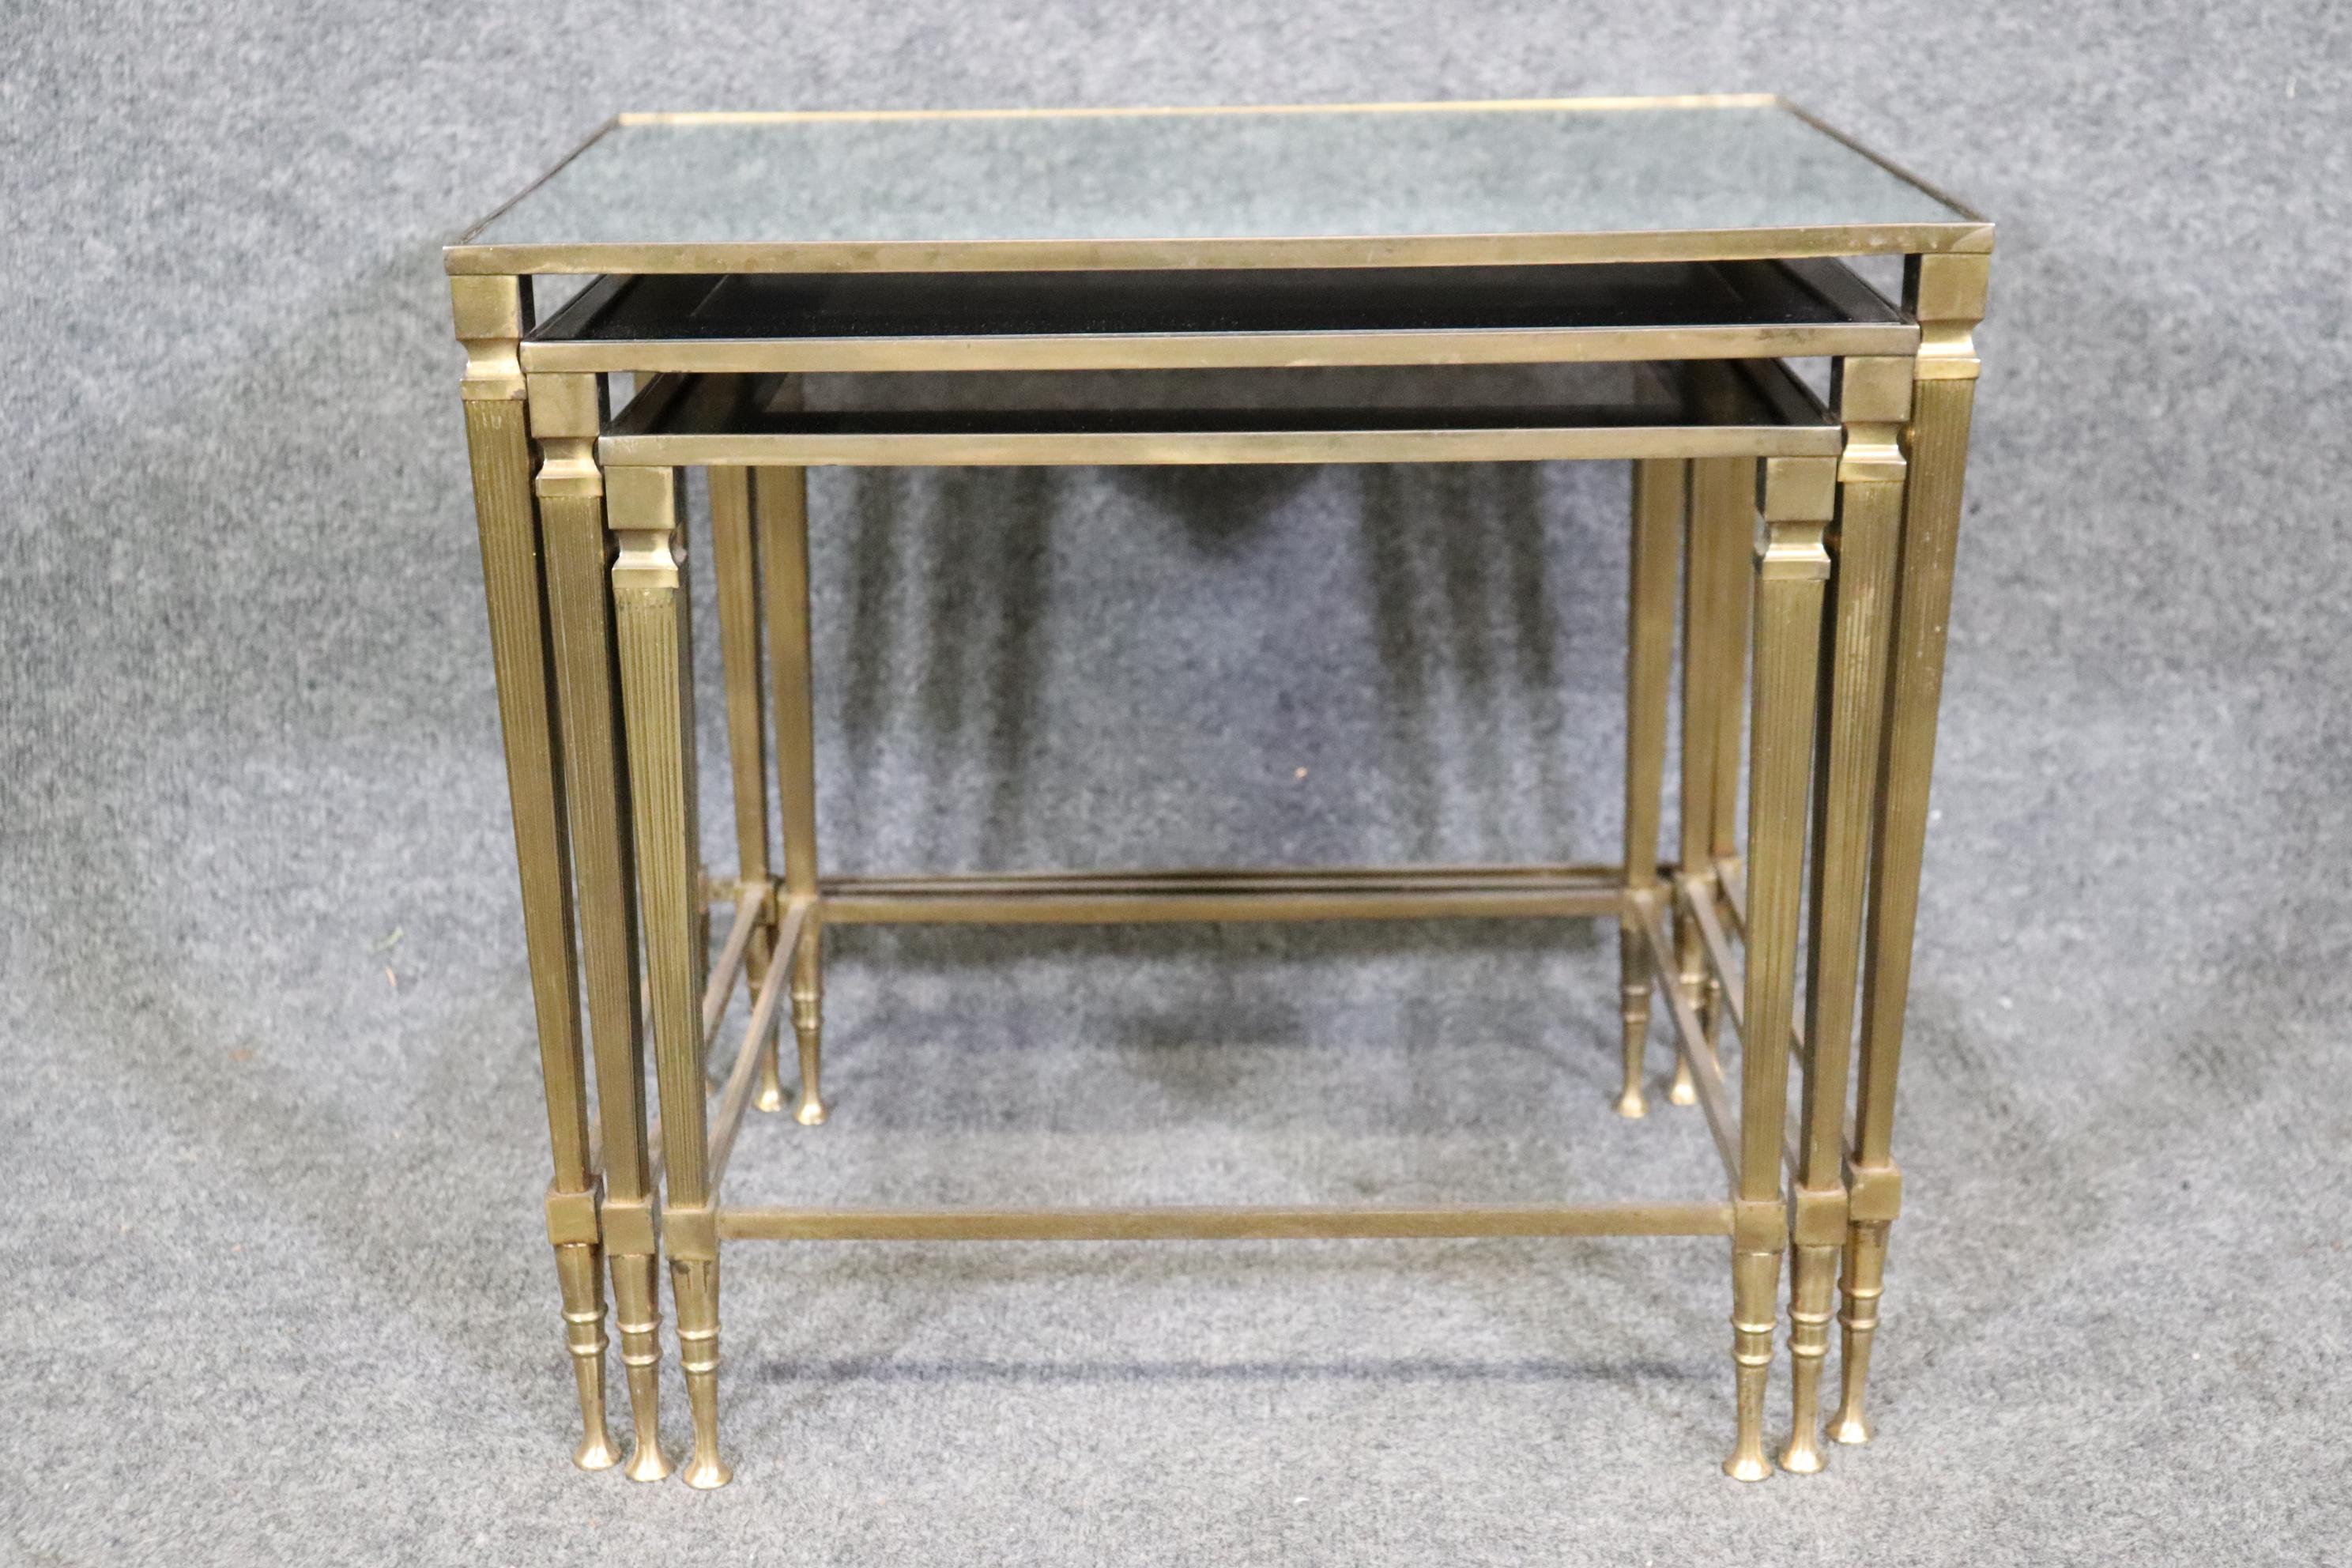 Dimensions- H: 17 1/4in W: 19in D: 14in (Measurements for the largest of the 3 tables)
This Set of French Directoire Style Nesting Tables By Maison Jansen are made of the highest quality and are a great example of Jansen's standard for high quality